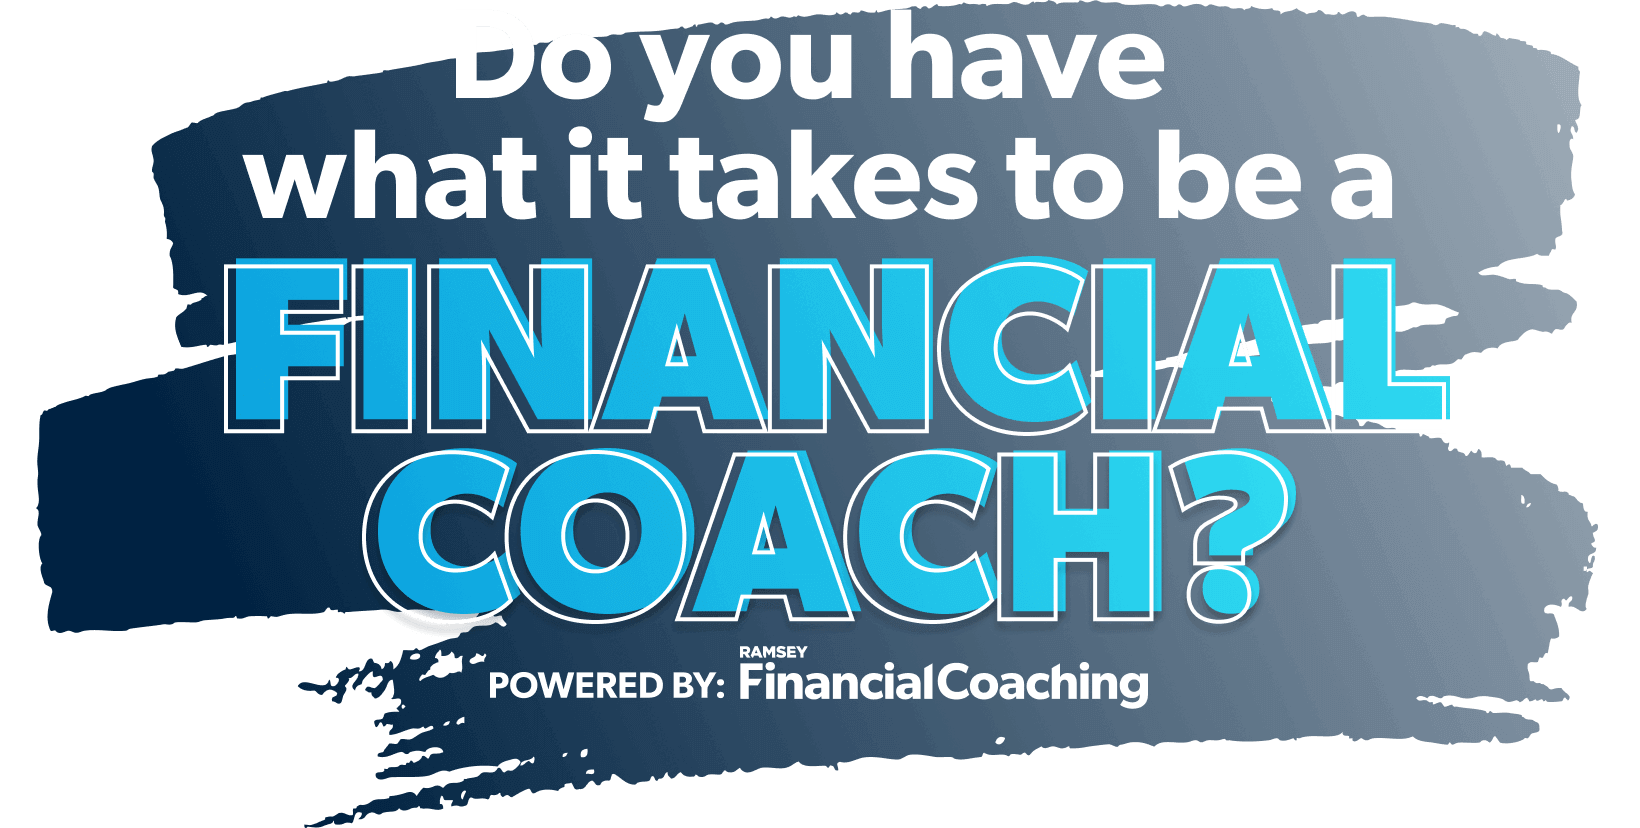 Do you have what it takes to become a financial coach?